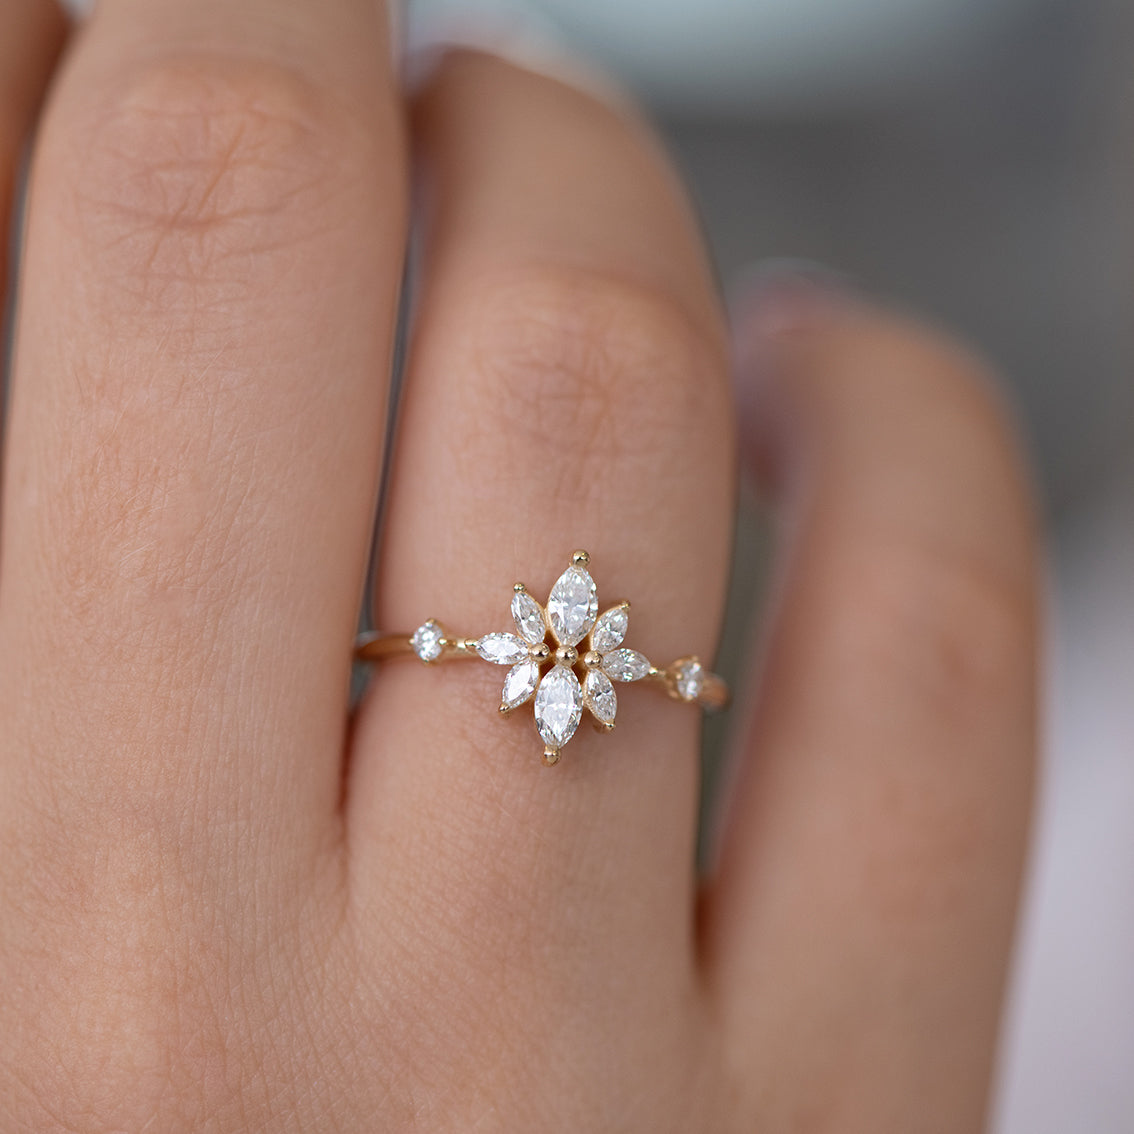 Buy Rose Gold Blooming Flower Ring for Women Online in India